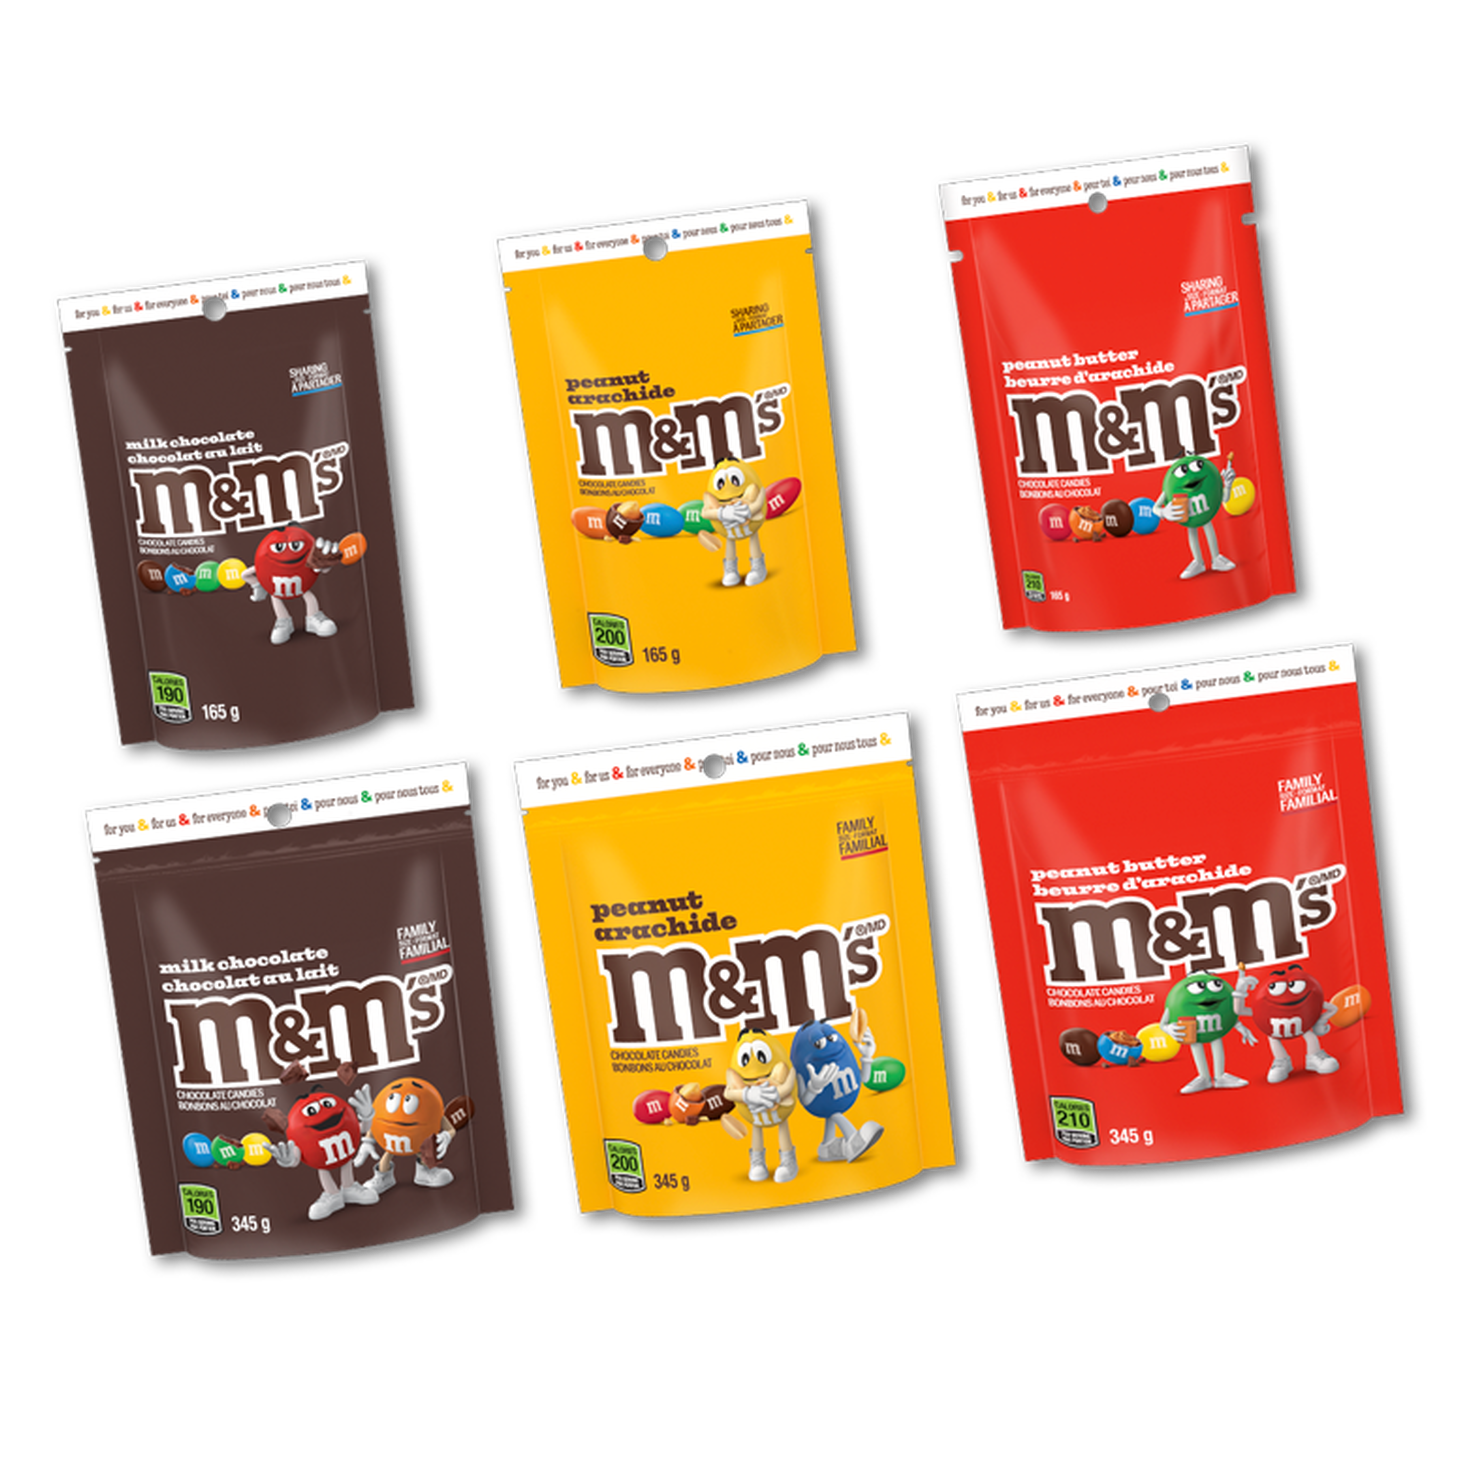 milk chocolate, peanut, and peanut butter M&M'S in sustainable packaging